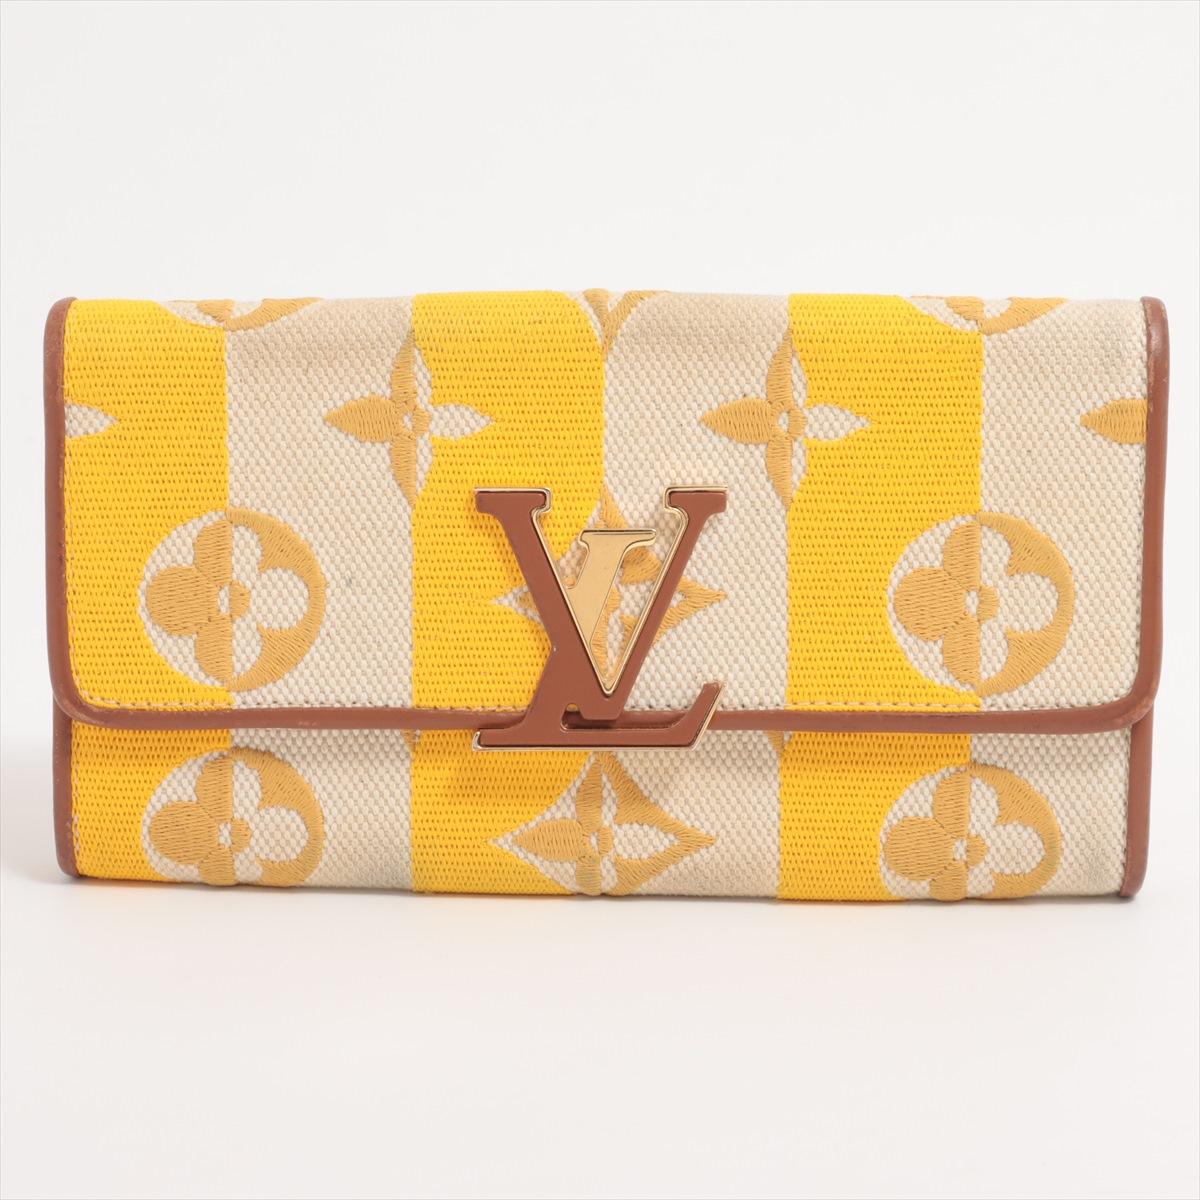 The Louis Vuitton Monogram Canvas Capucine Wallet in Stripe Yellow Beige is a chic and sophisticated accessory that seamlessly combines iconic design with a touch of playful elegance. Adorned with the classic LV monogram canvas, the wallet stands